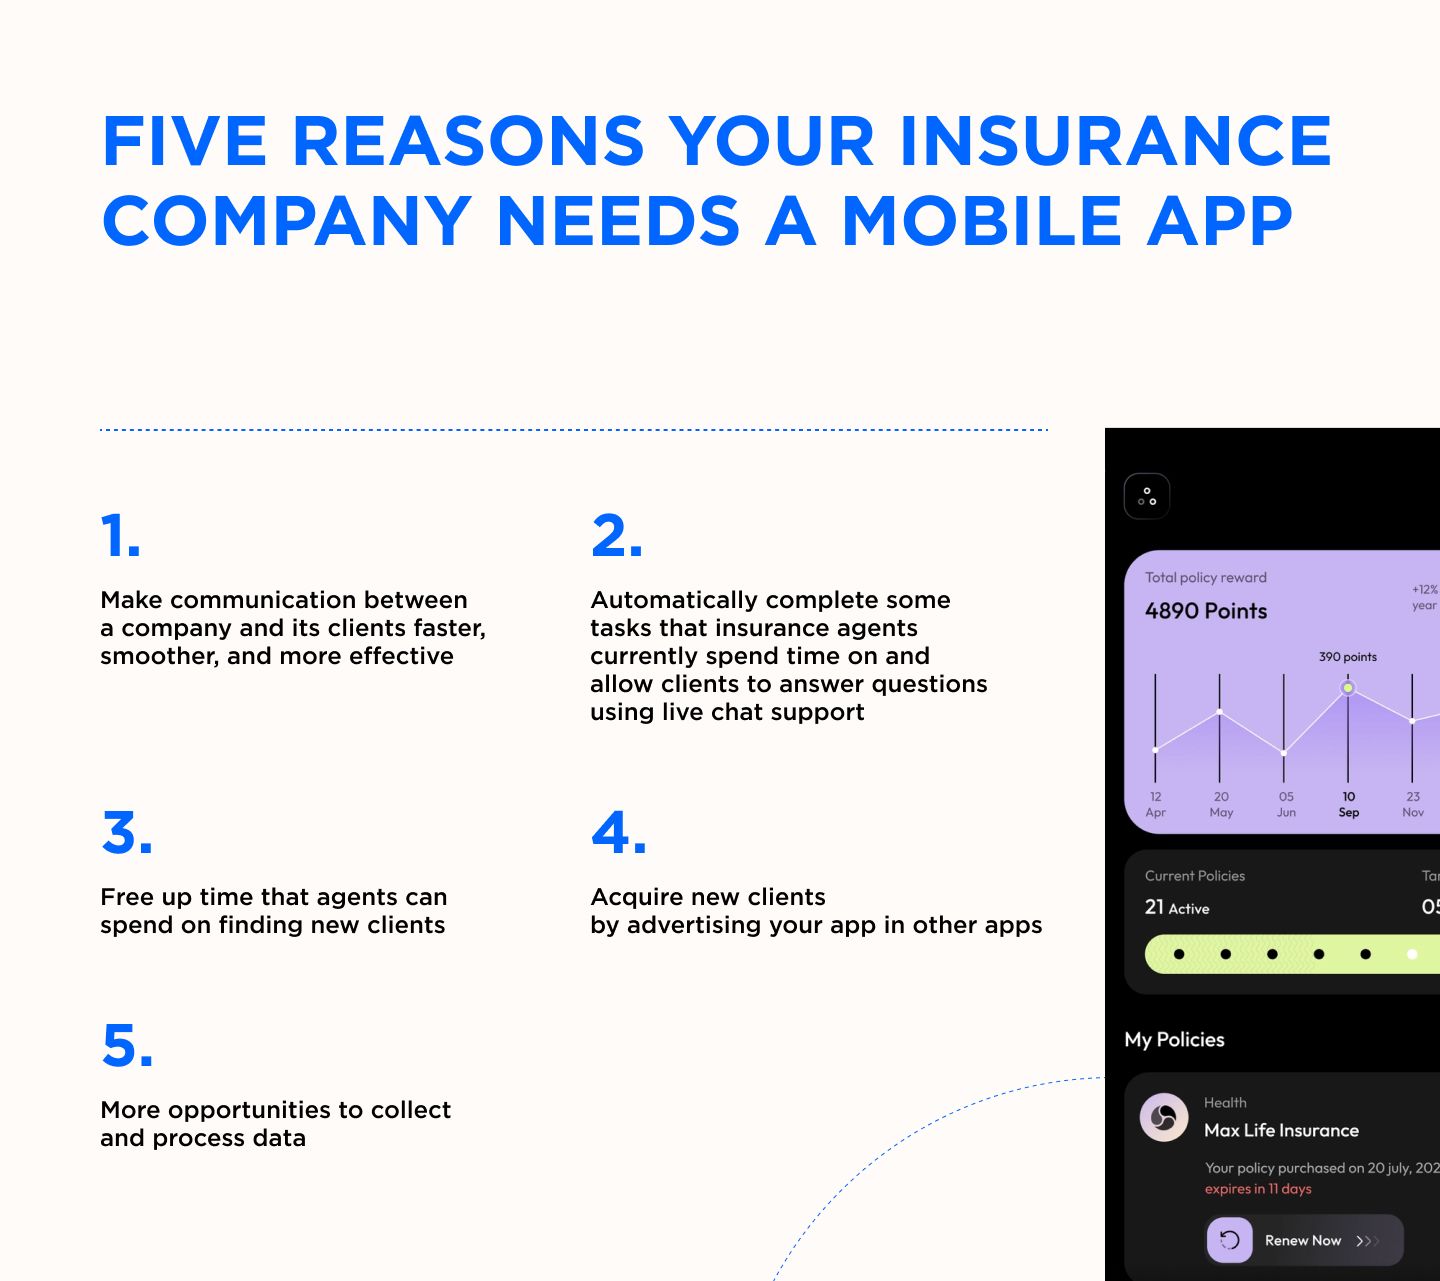 Five reasons your insurance company needs a mobile app